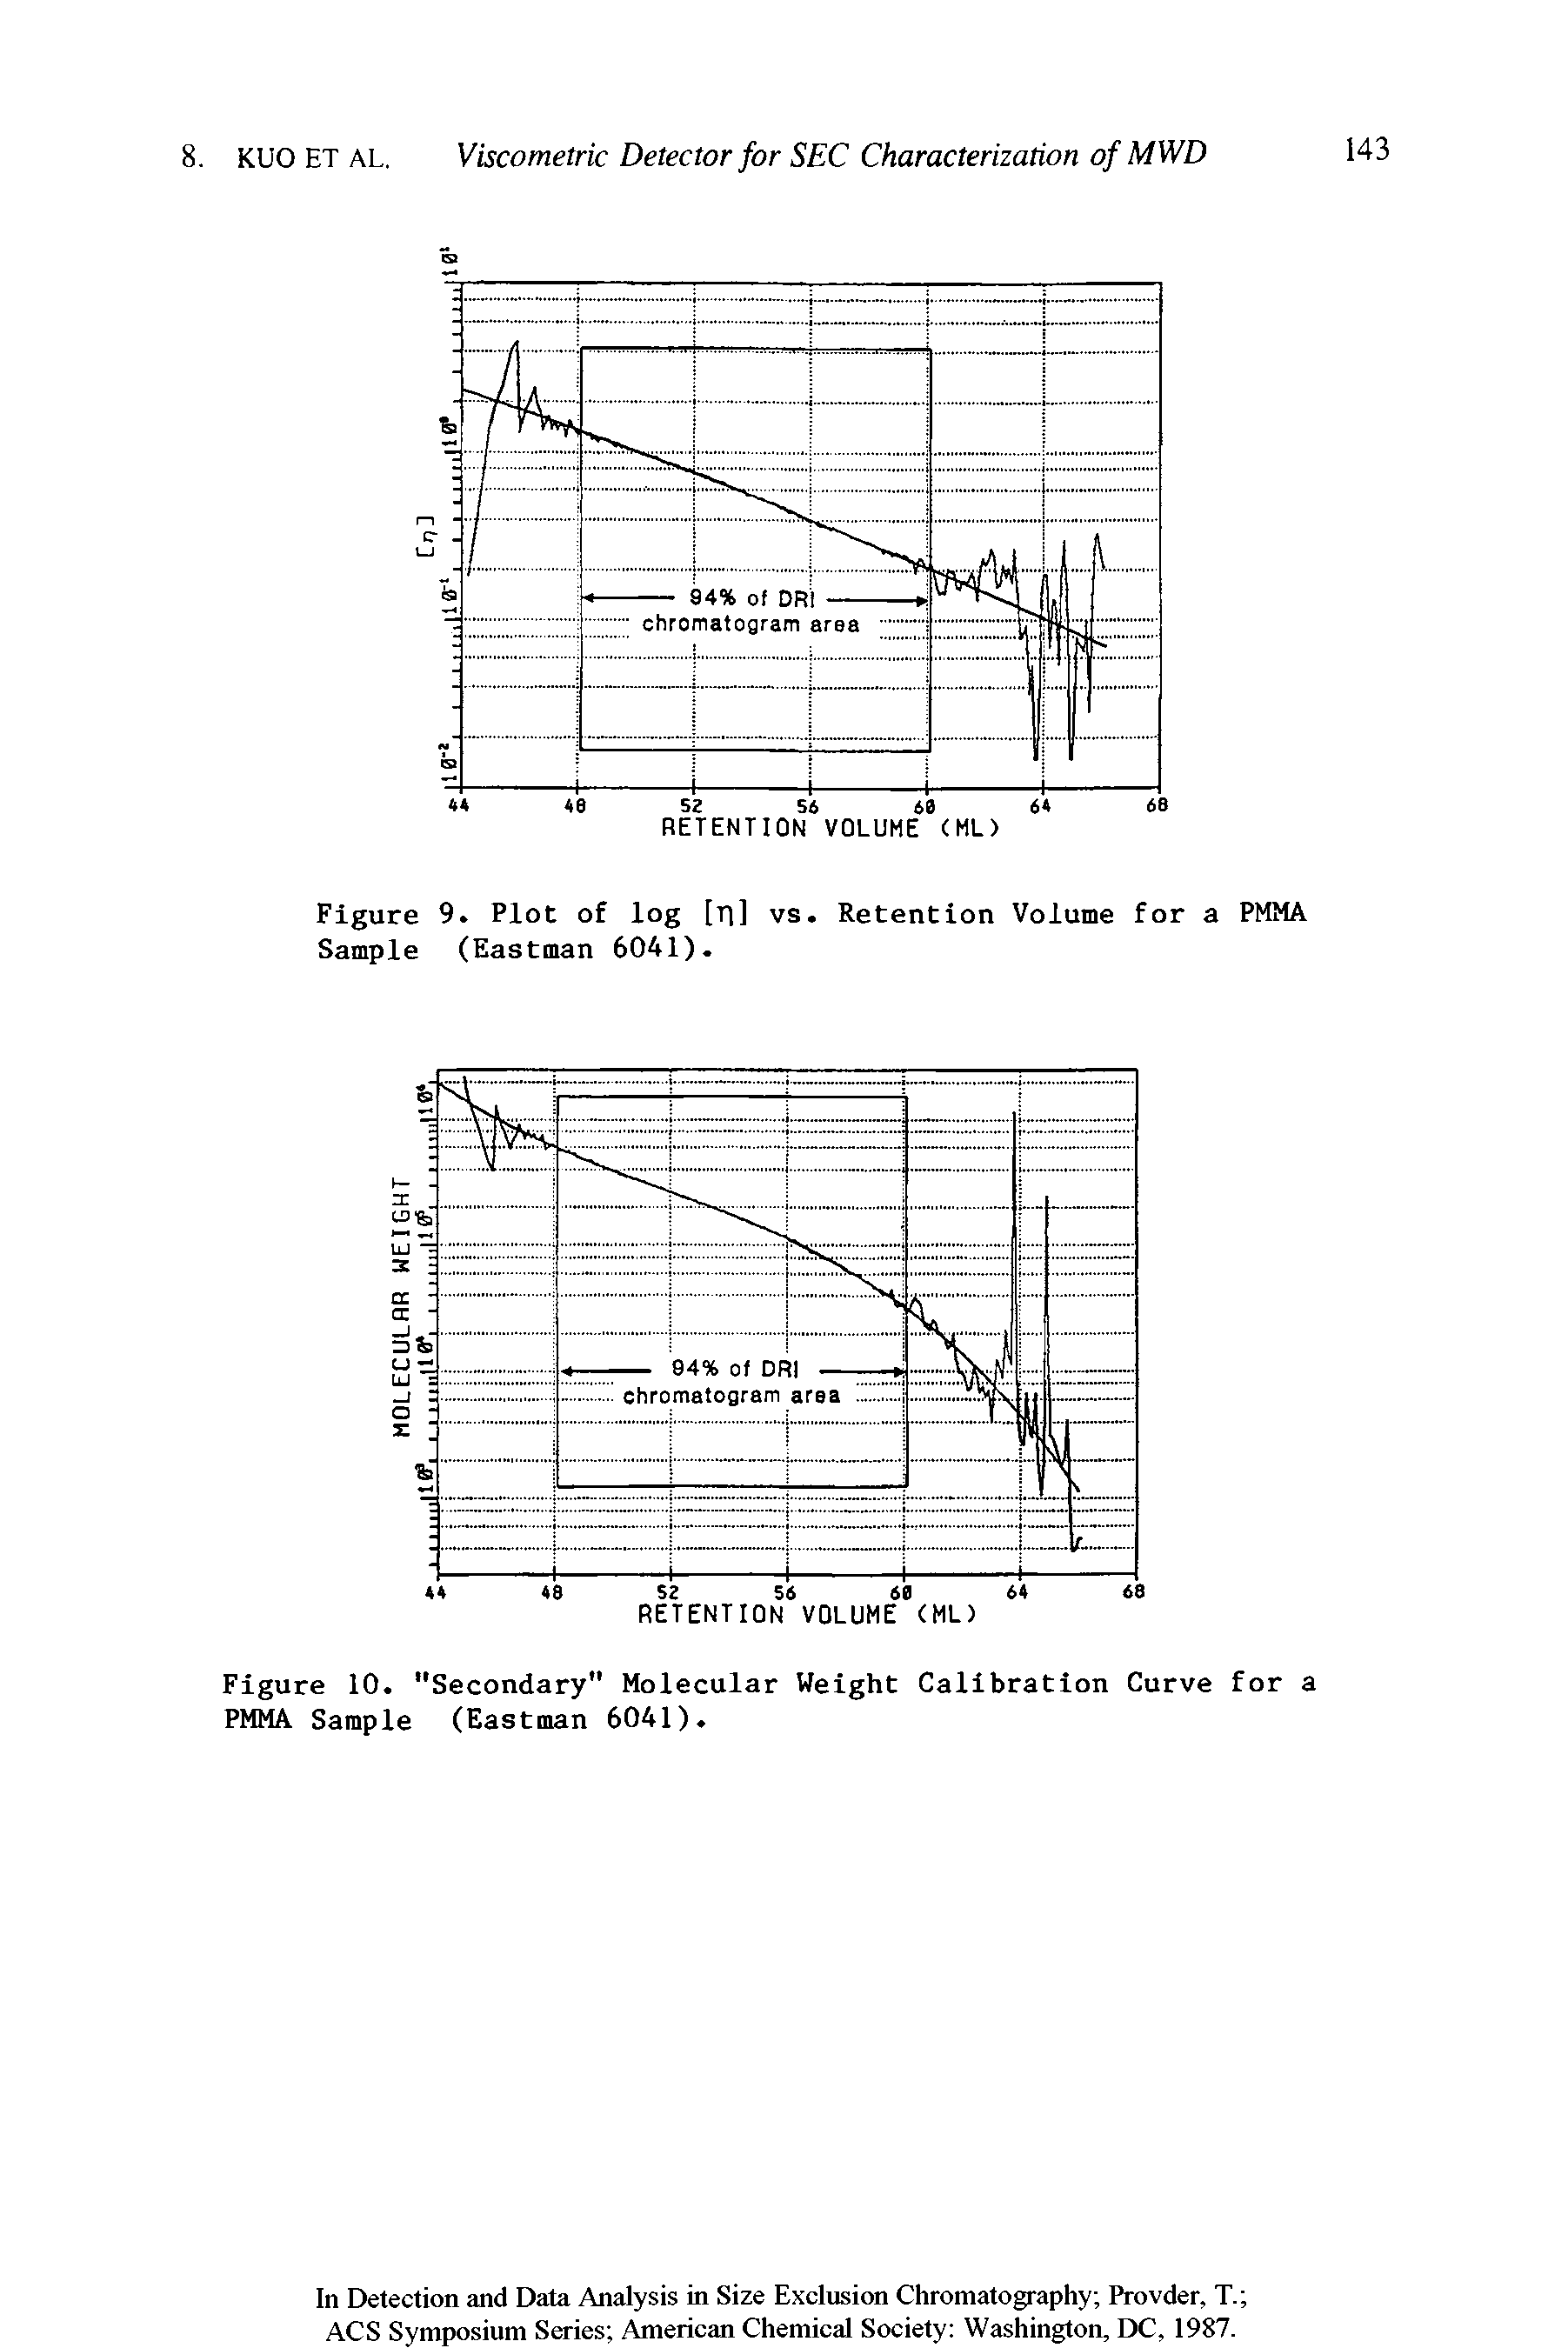 Figure 10. "Secondary" Molecular Weight Calibration Curve for a PMMA Sample (Eastman 6041).